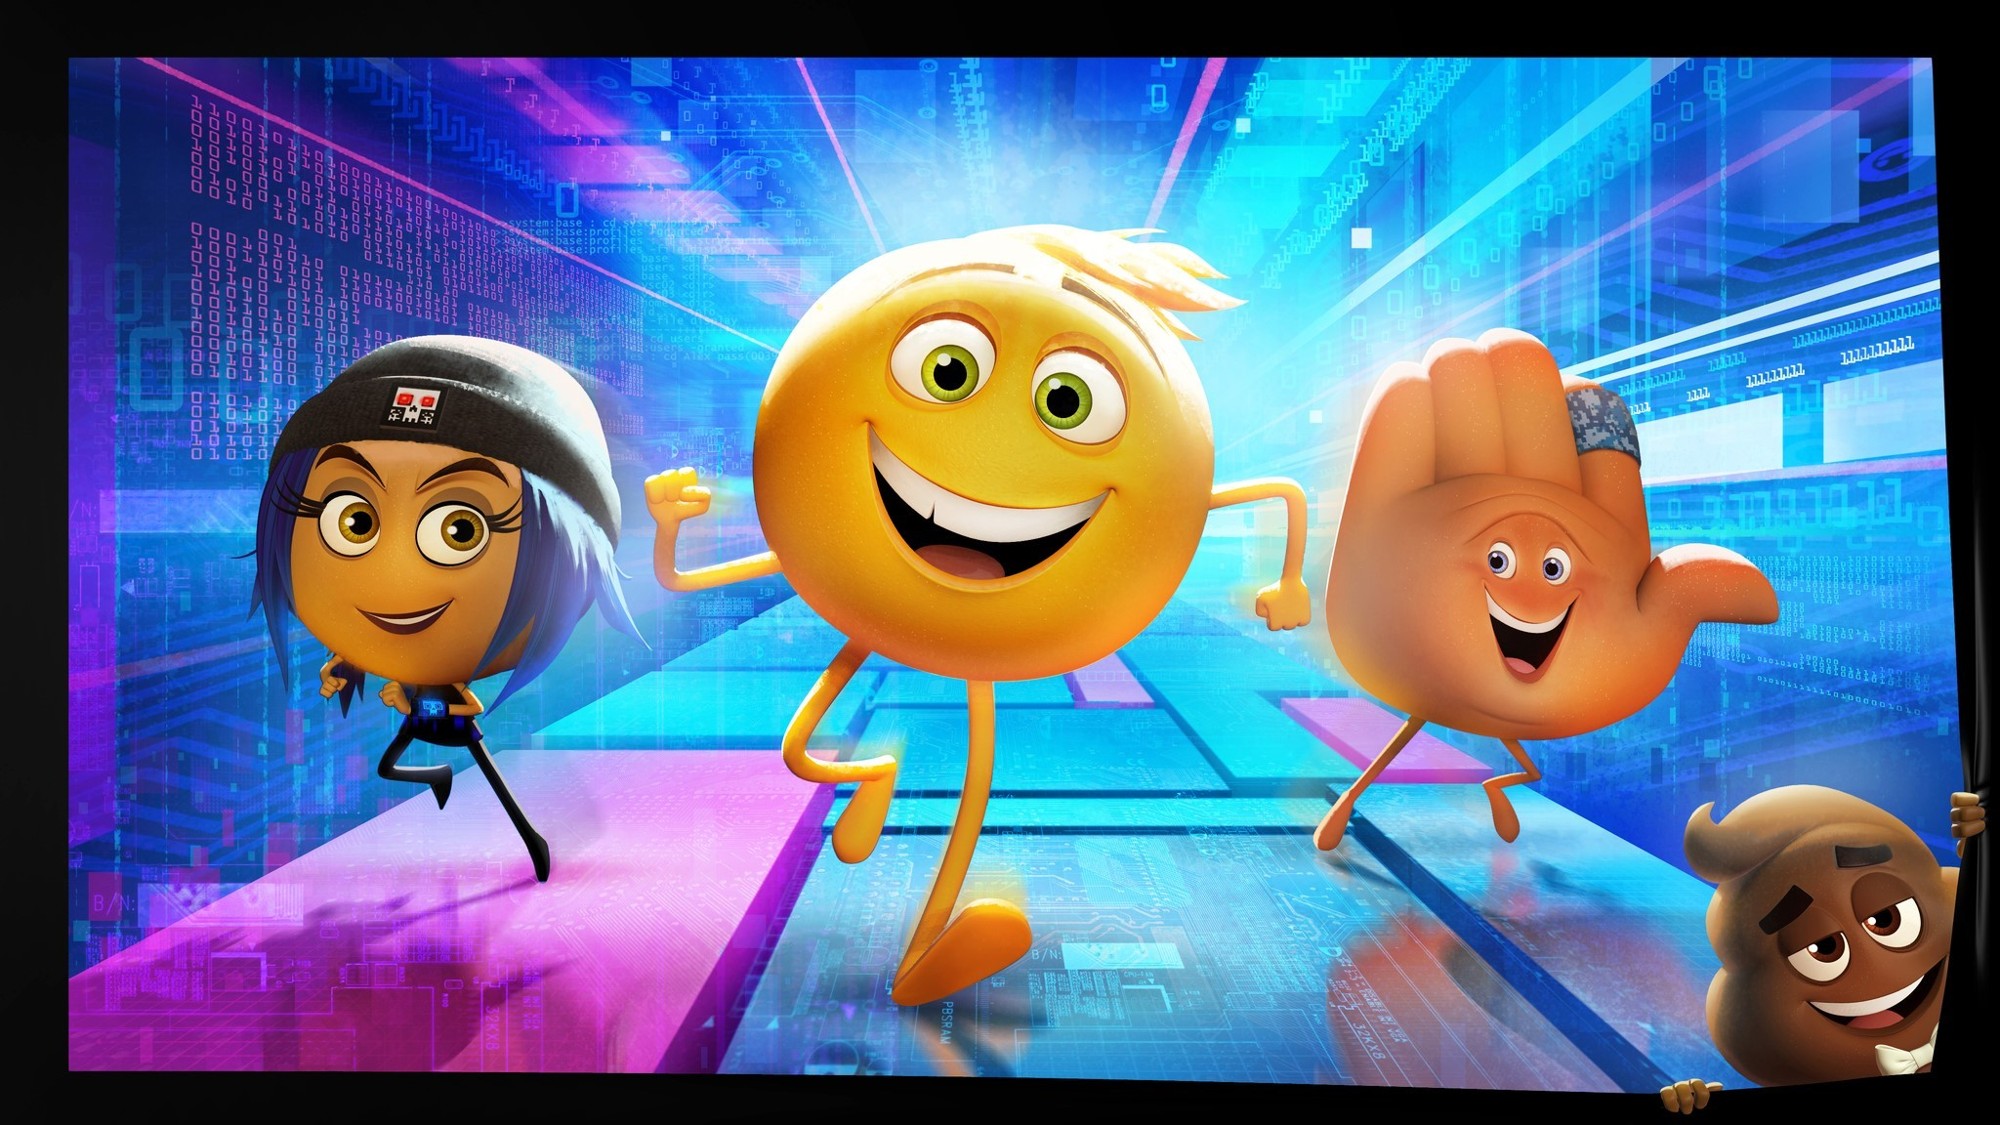 Jailbreak, Gene, Hi-5 and Poop from Sony Pictures Animation's The Emoji Movie (2017)